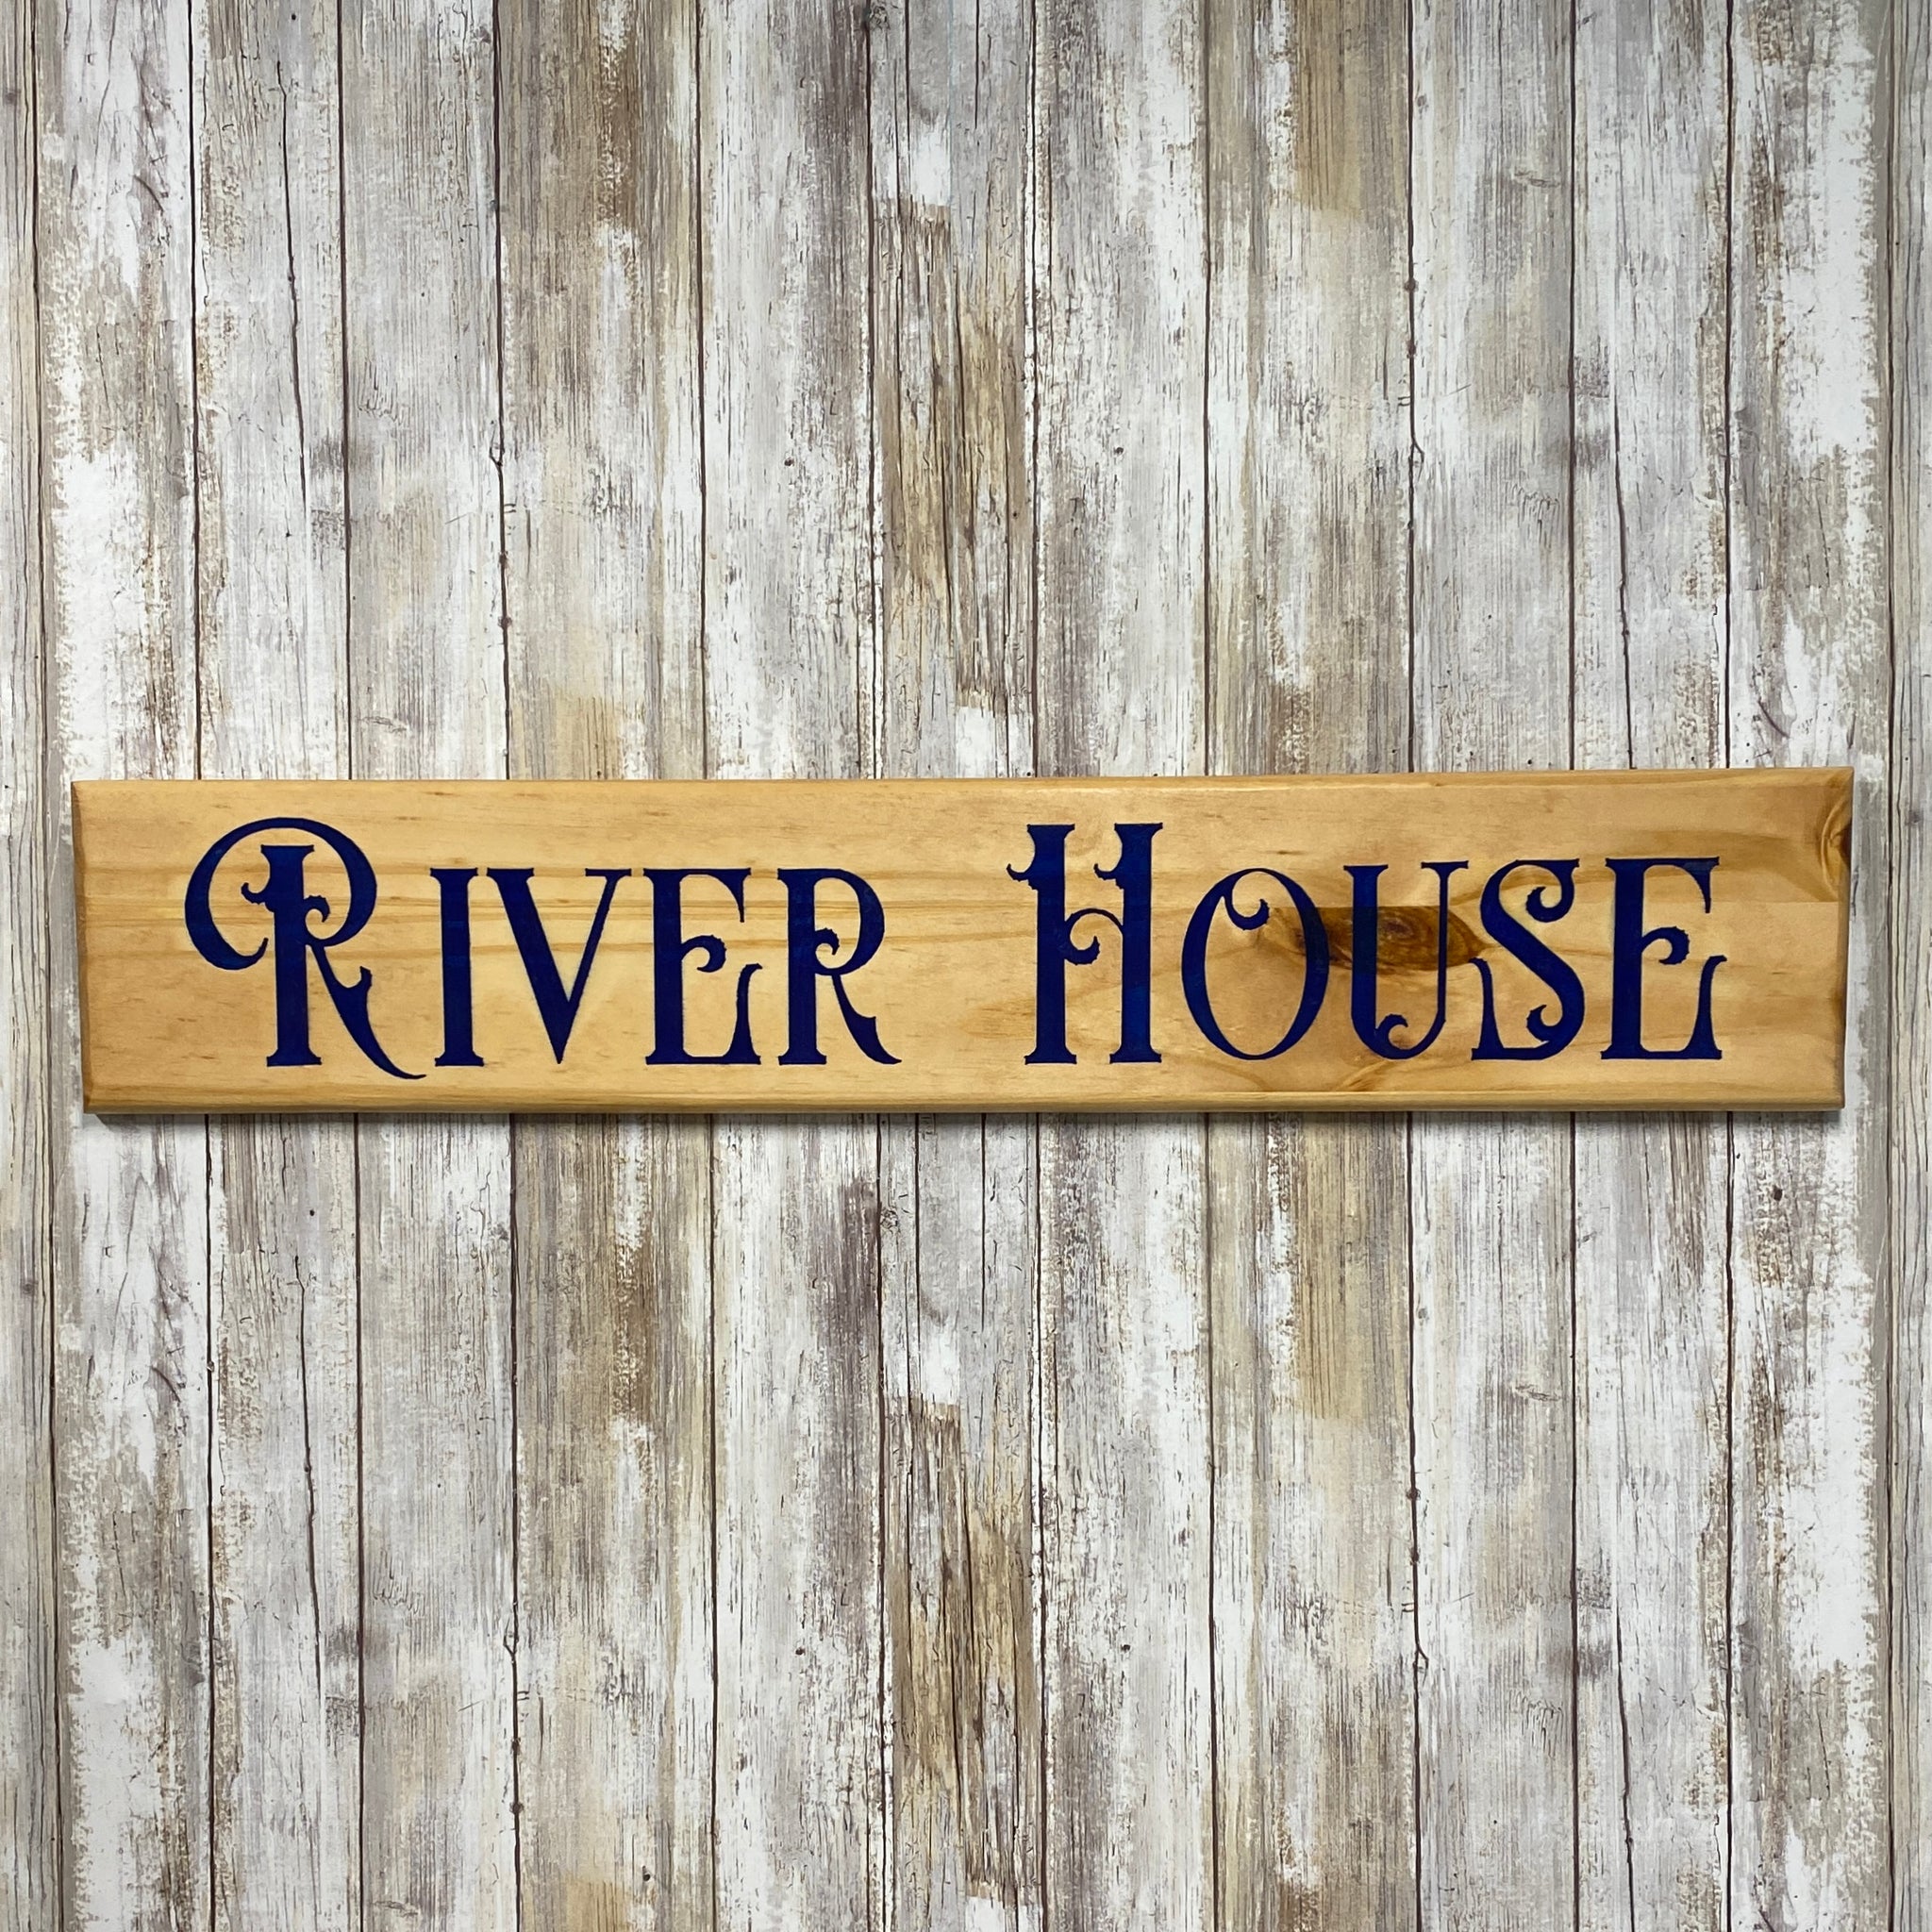 River House - Carved Pine Wall Hanging Sign with Resin Inlay